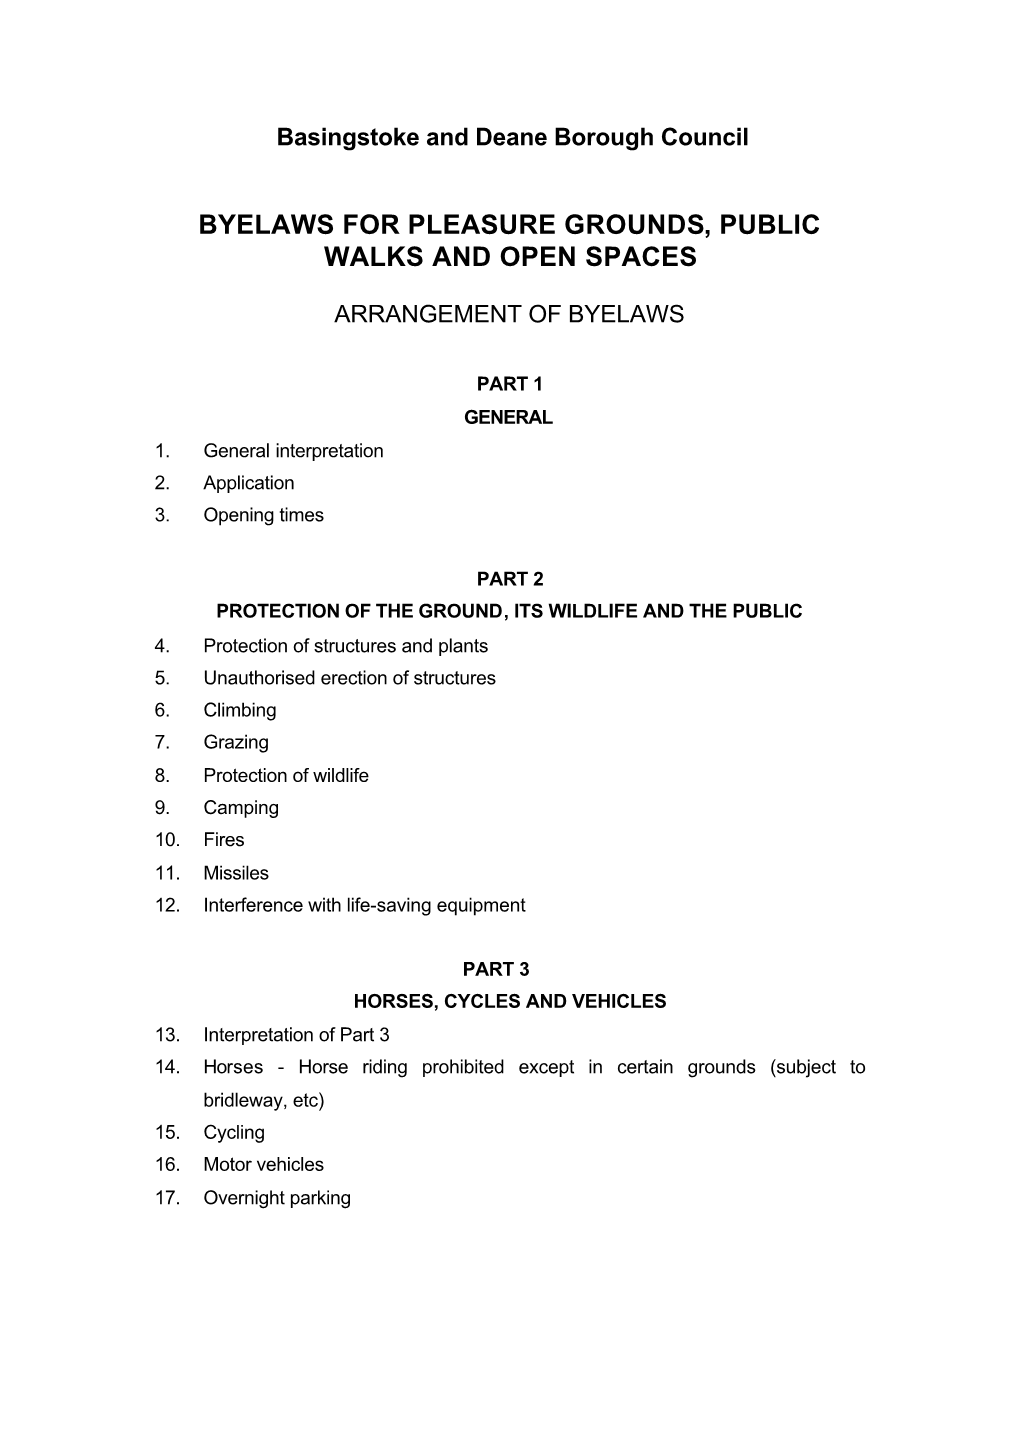 Byelaws for Pleasure Grounds, Public Walks and Open Spaces